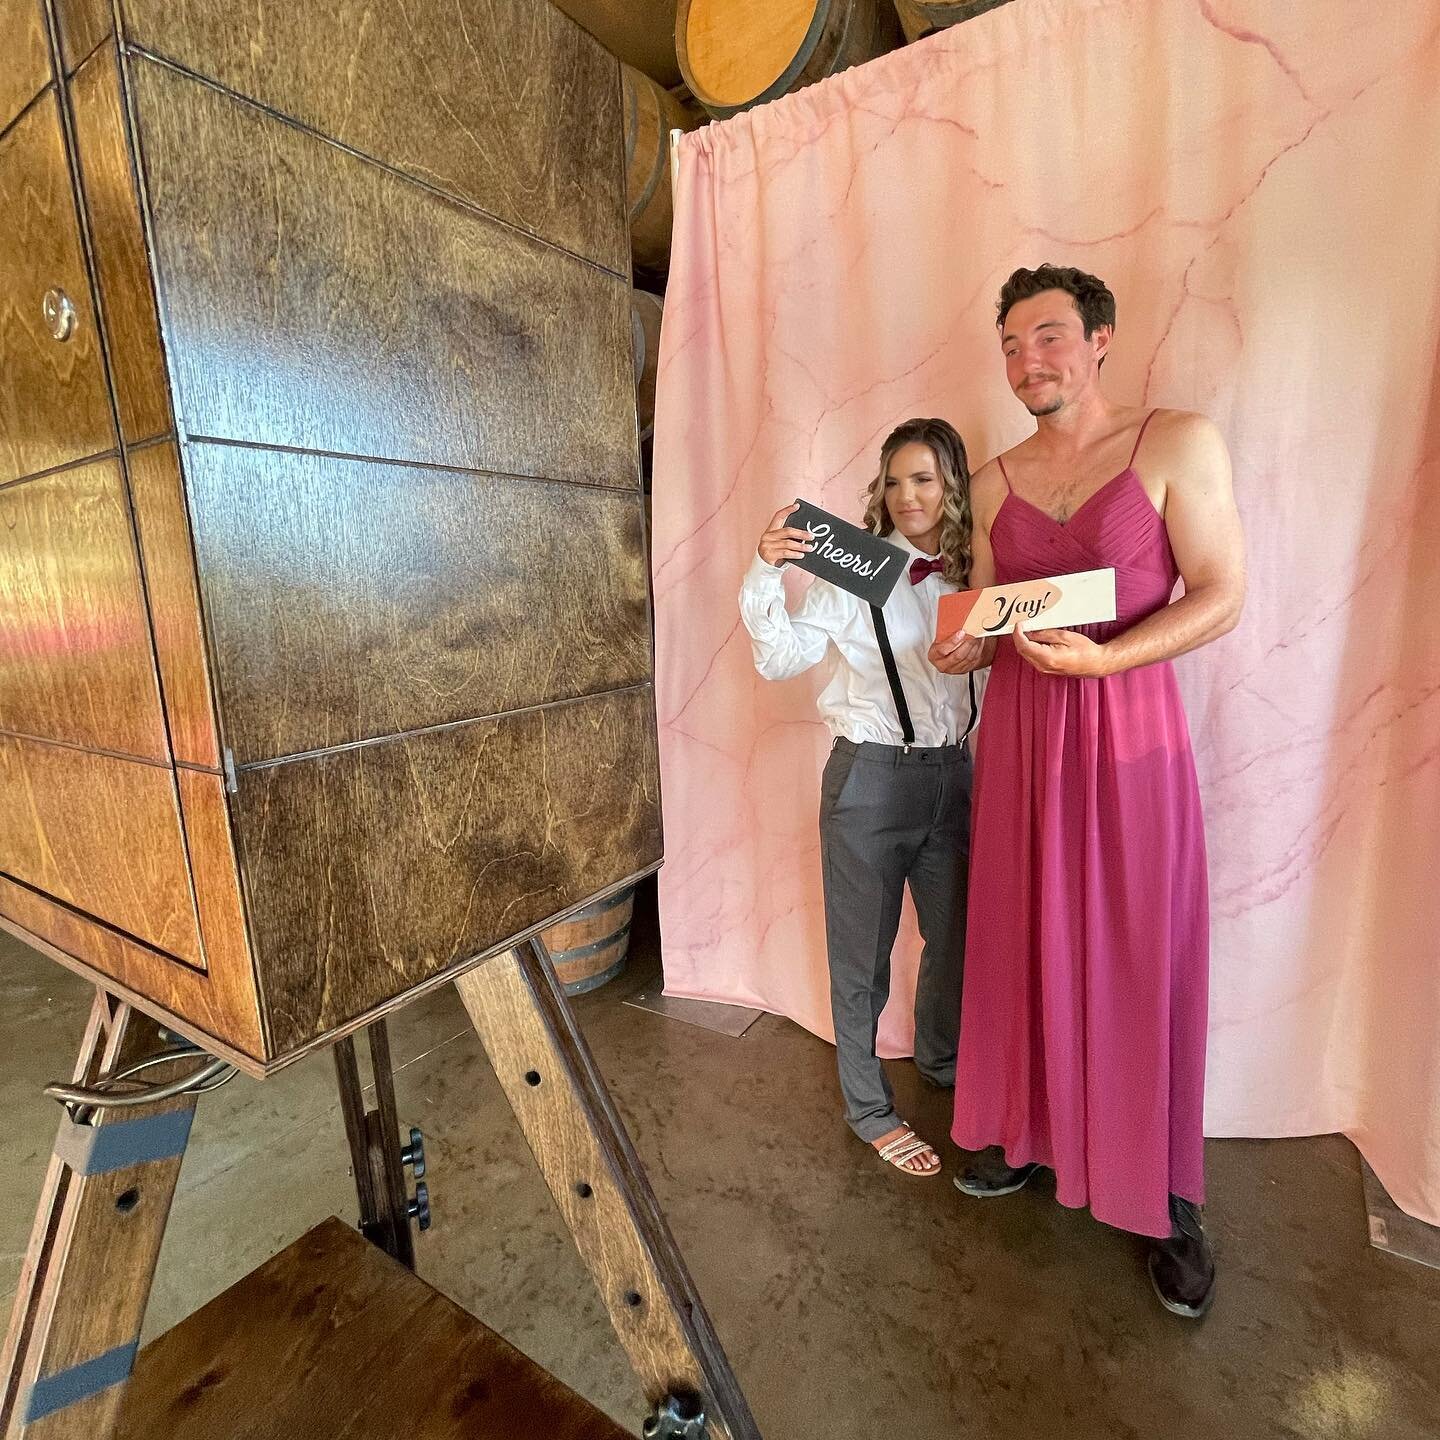 Freaky Friday! We&rsquo;re gearing up for a fun and busy weekend! 
.
.
.
.
.
#photobooth #socalphotobooth #wedding #socalwedding #unionbooth #losangeles #sandiego #inlandempire #lorimarwinery